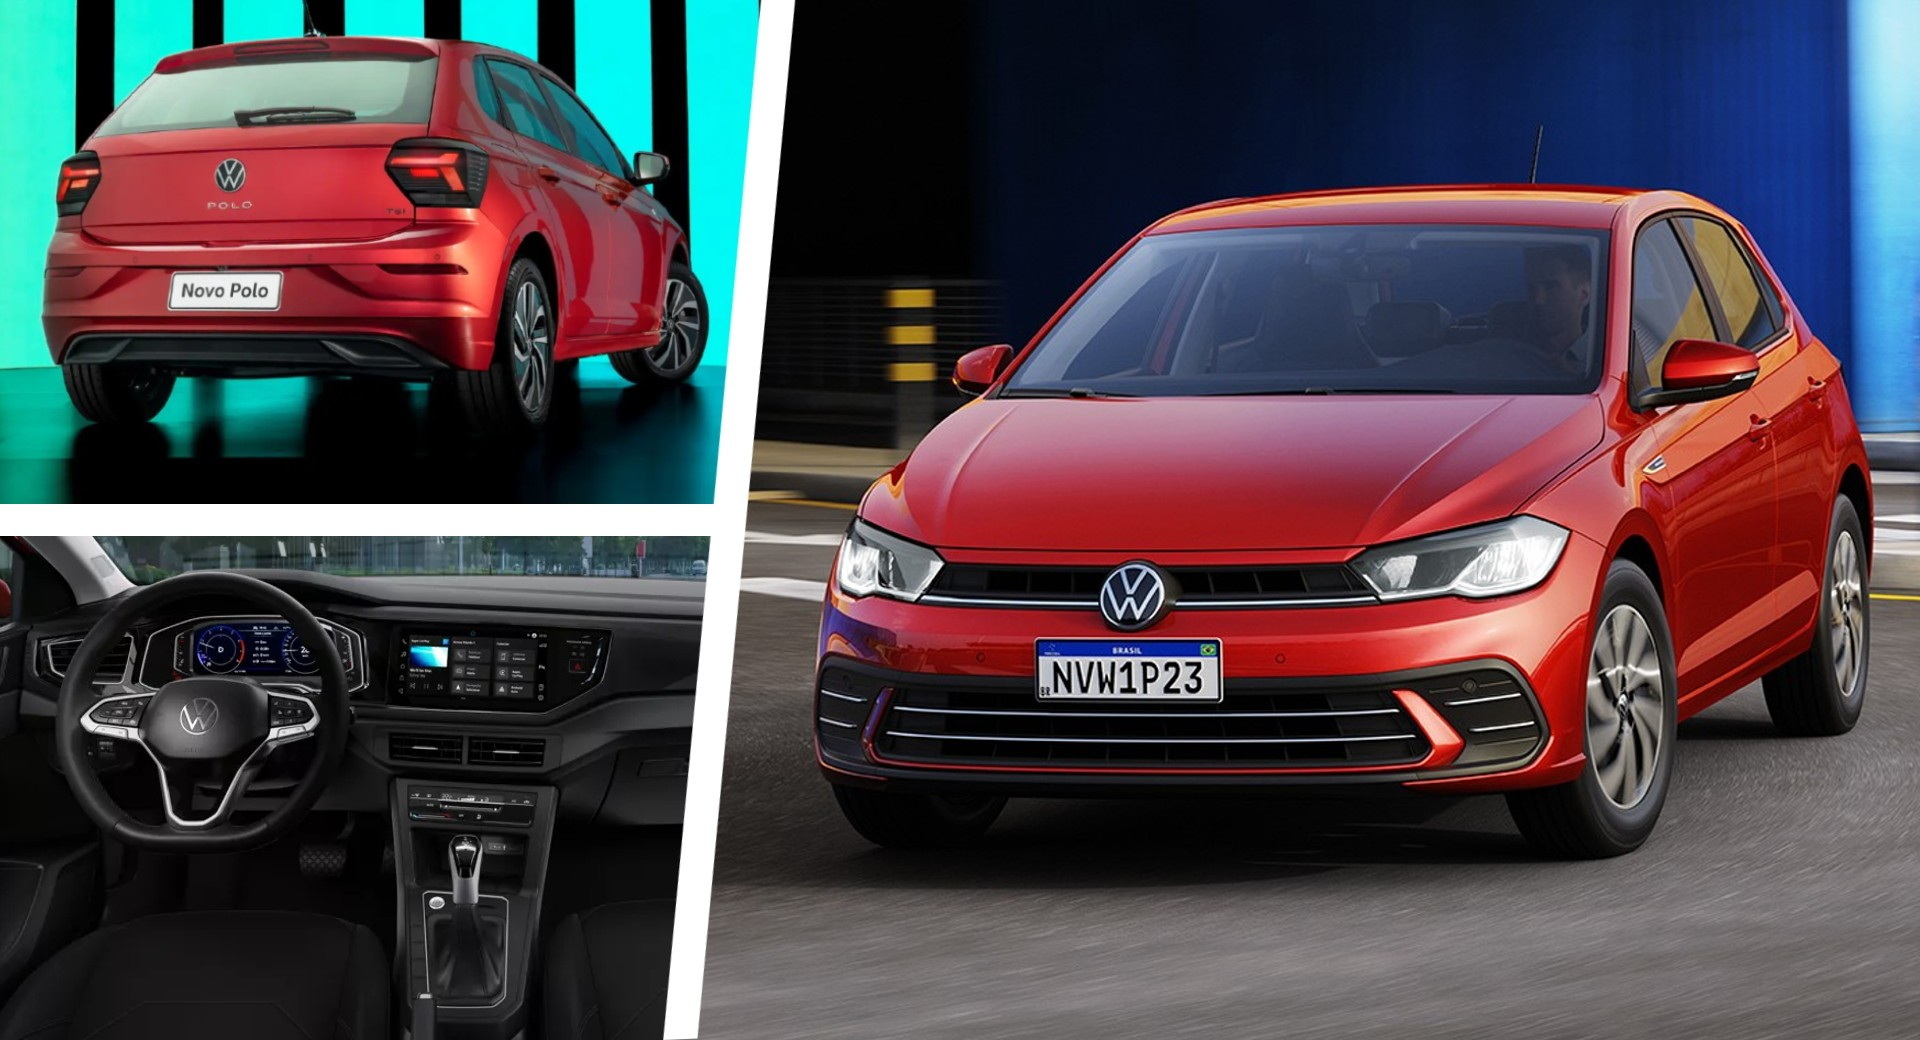 volkswagen polo: 'When I arrived, I was just a hatchback; I pass